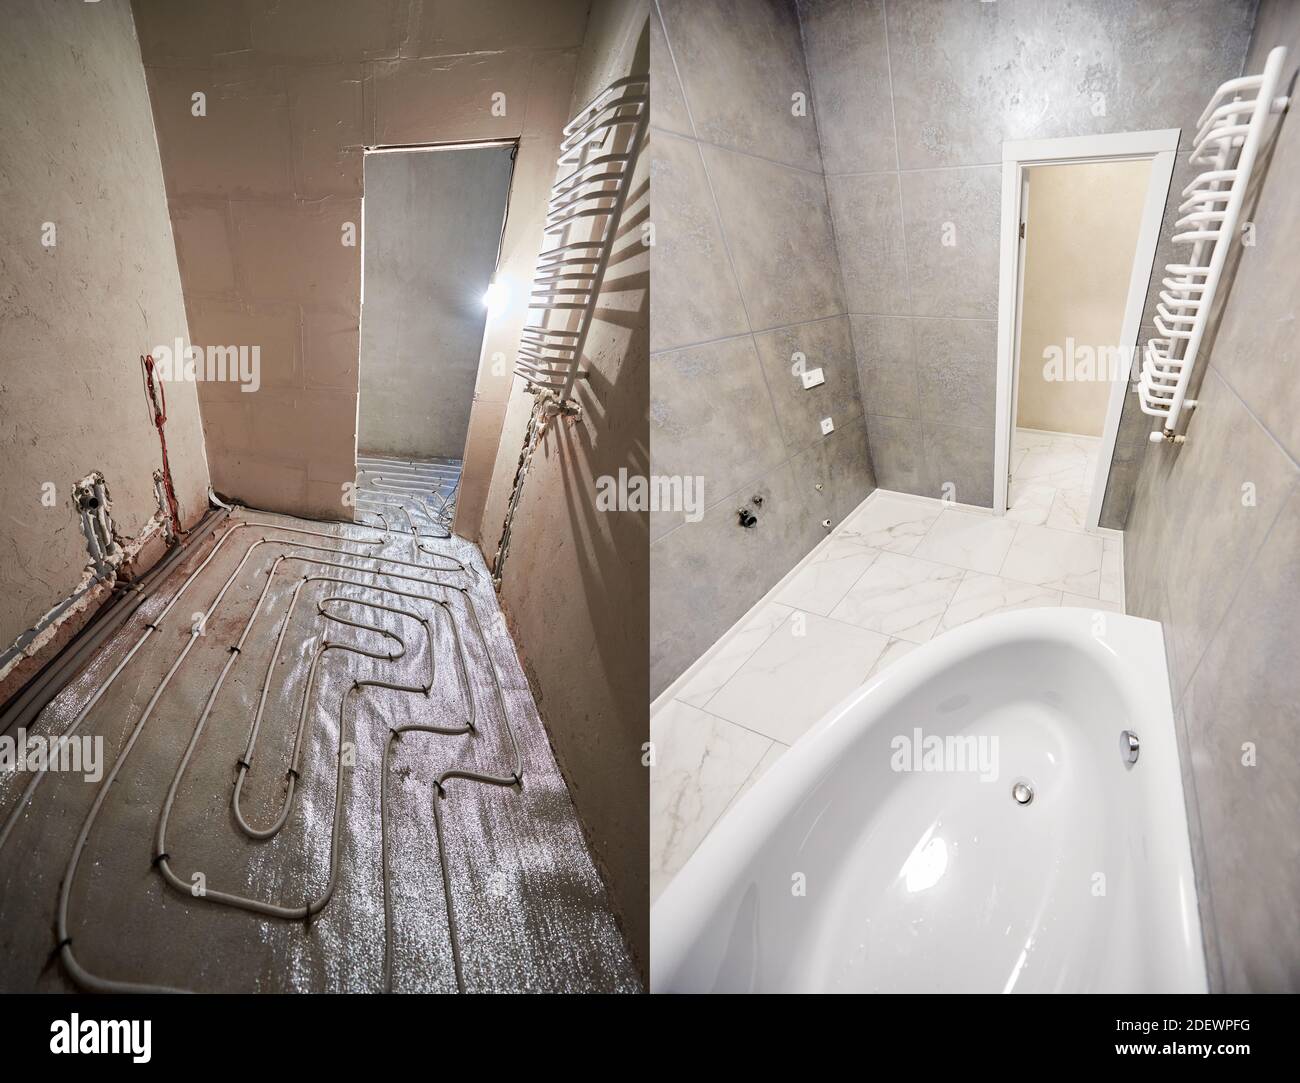 Collage of modern bathroom with marble floor before and after renovation. Comparison of old restroom with underfloor heating pipes and new washroom with heated towel rail and while bathtub. Stock Photo